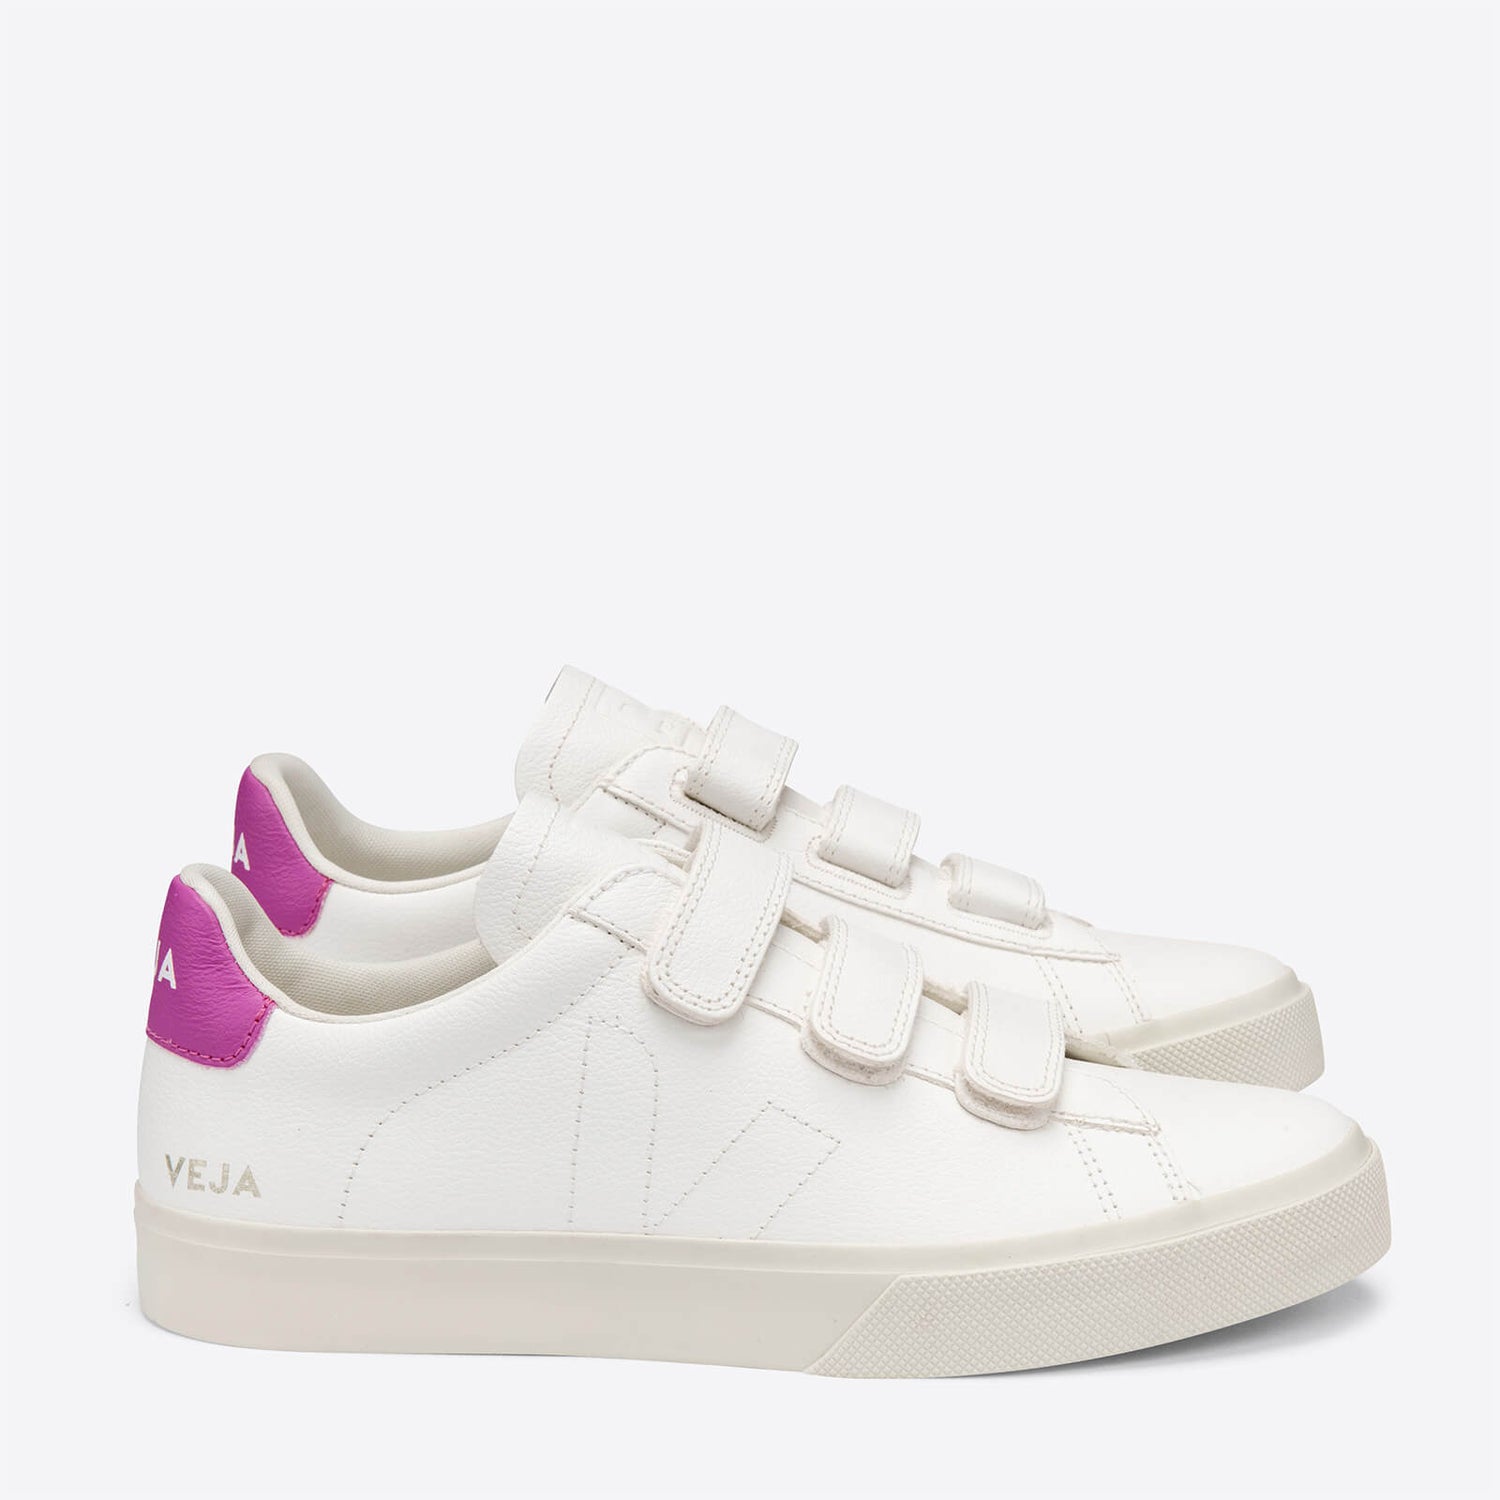 Veja Women's Recife Chrome Free Leather Velcro Trainers - Extra White/Ultraviolet - UK 2